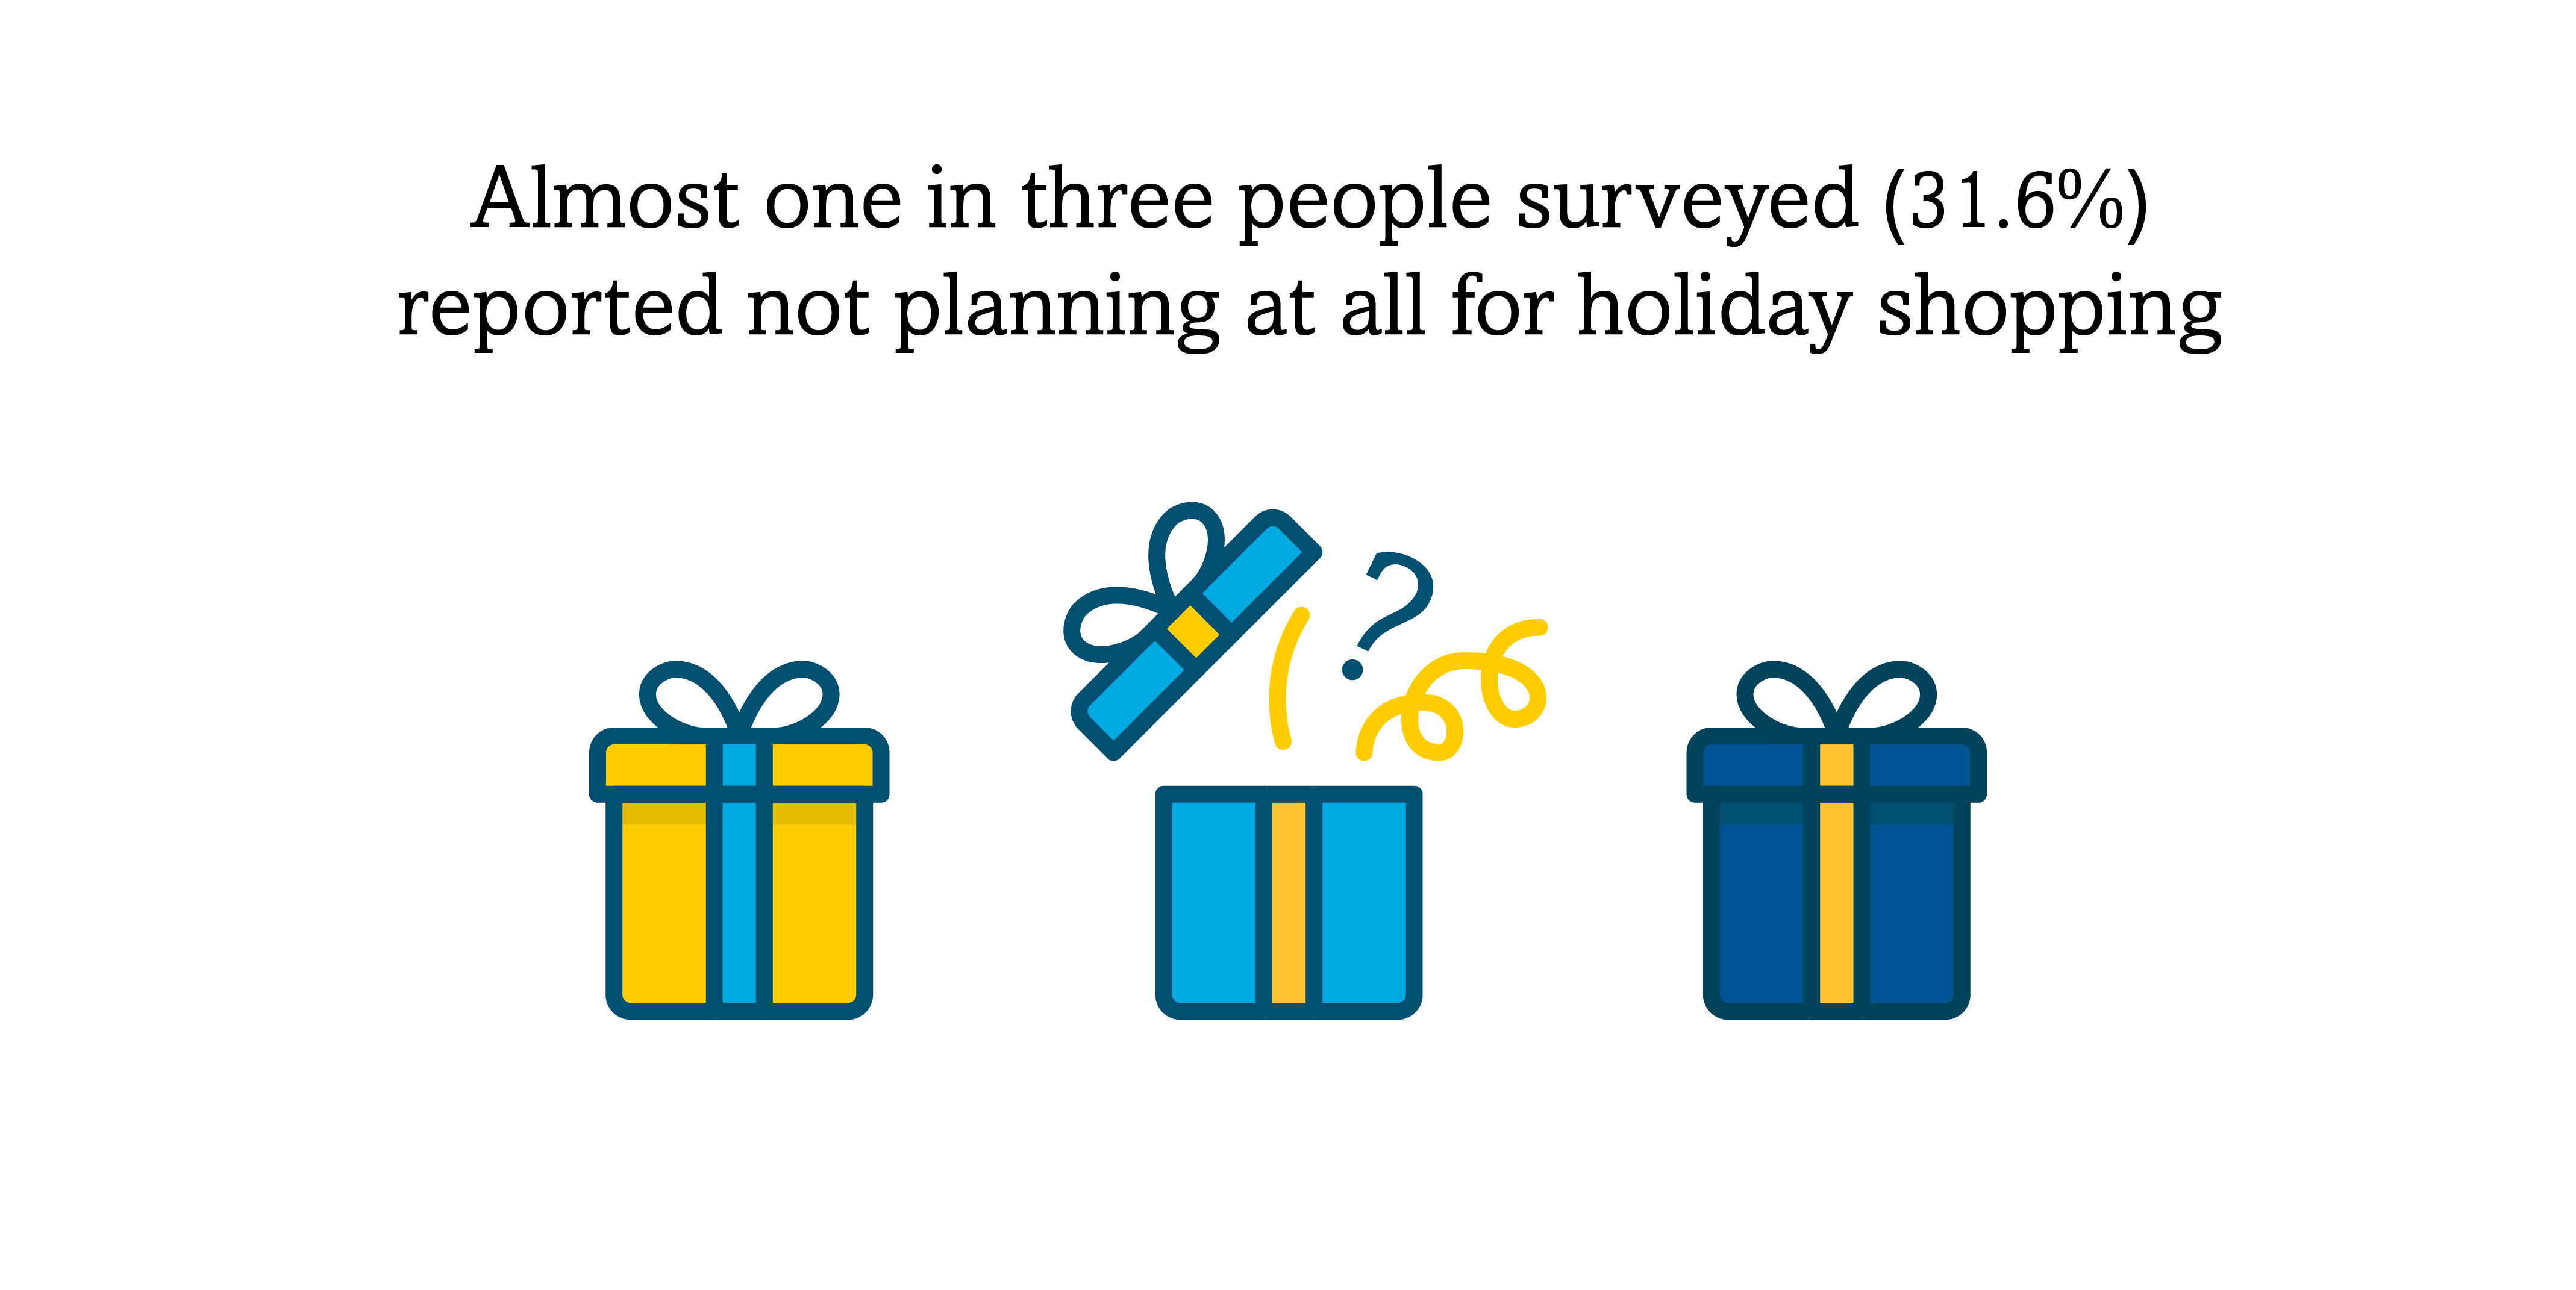 In 2023 31.6% of people did not plan for holiday shopping.